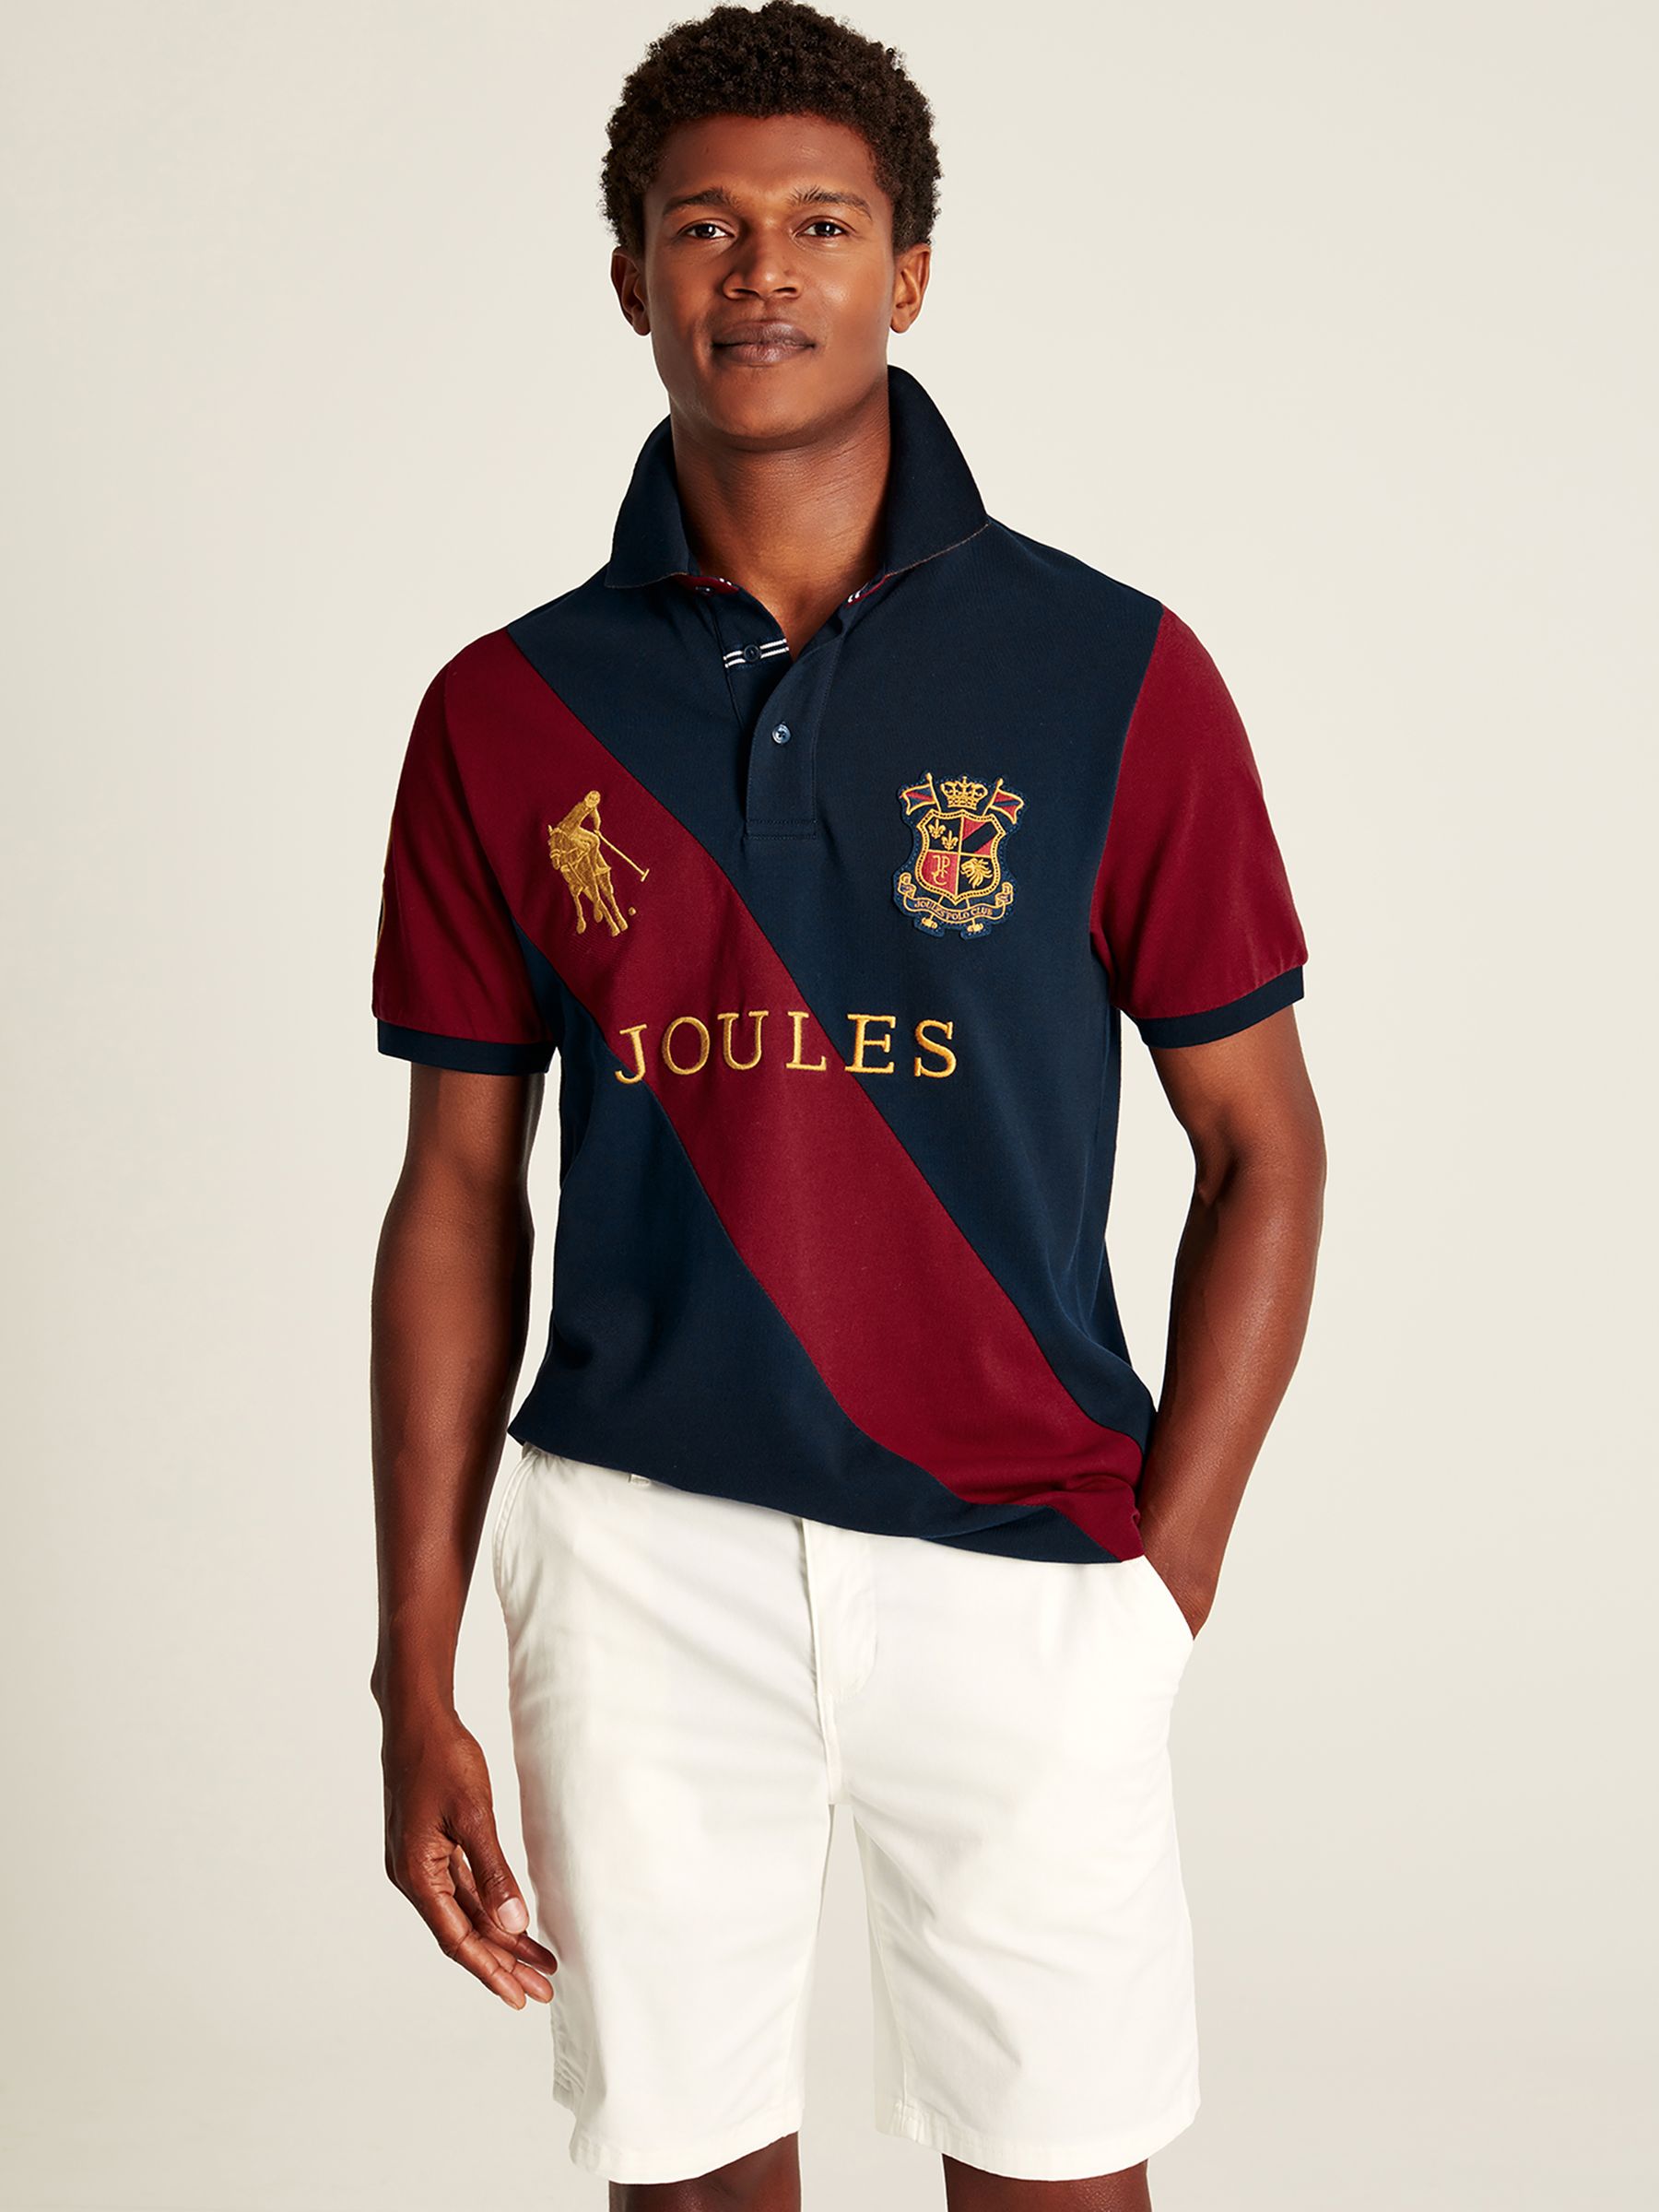 Buy Joules Embellished Embroidered Polo Shirt from the Joules online shop